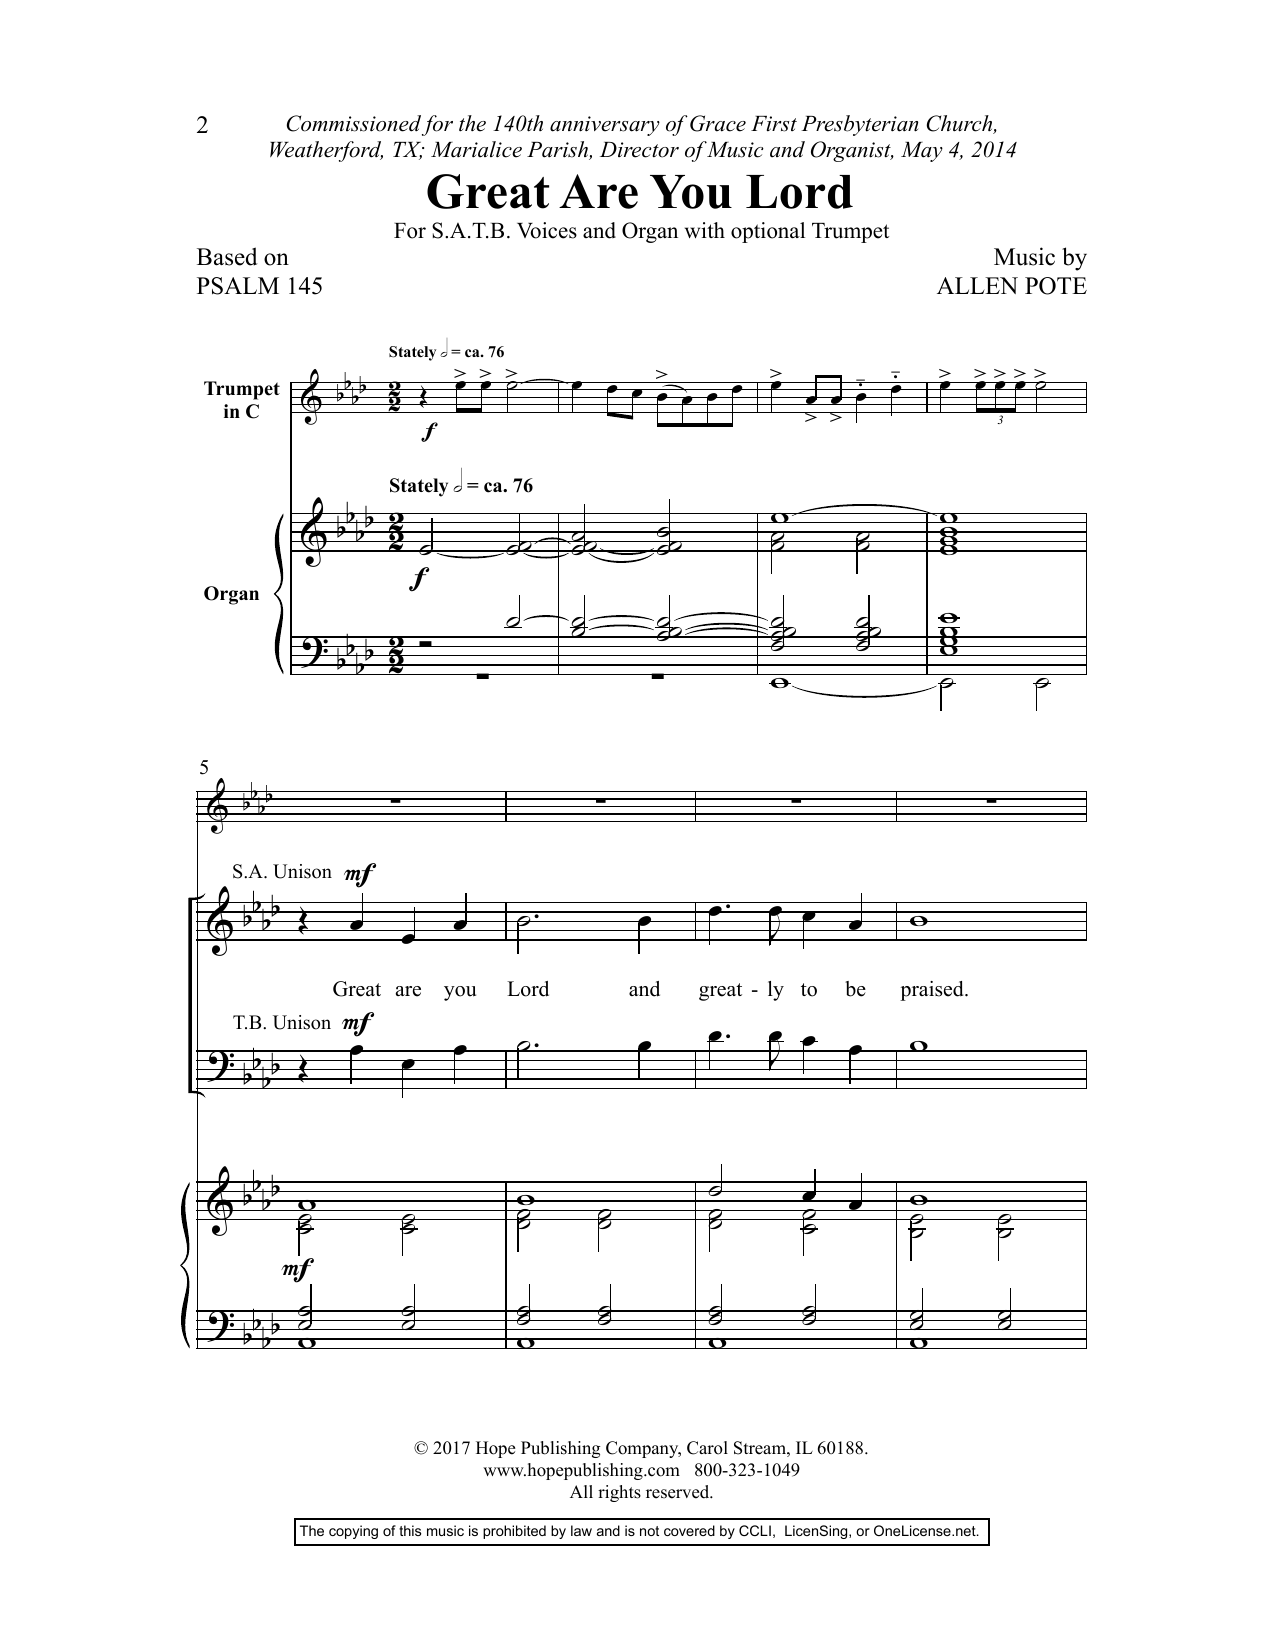 Download Allen Pote Great Are You Lord Sheet Music